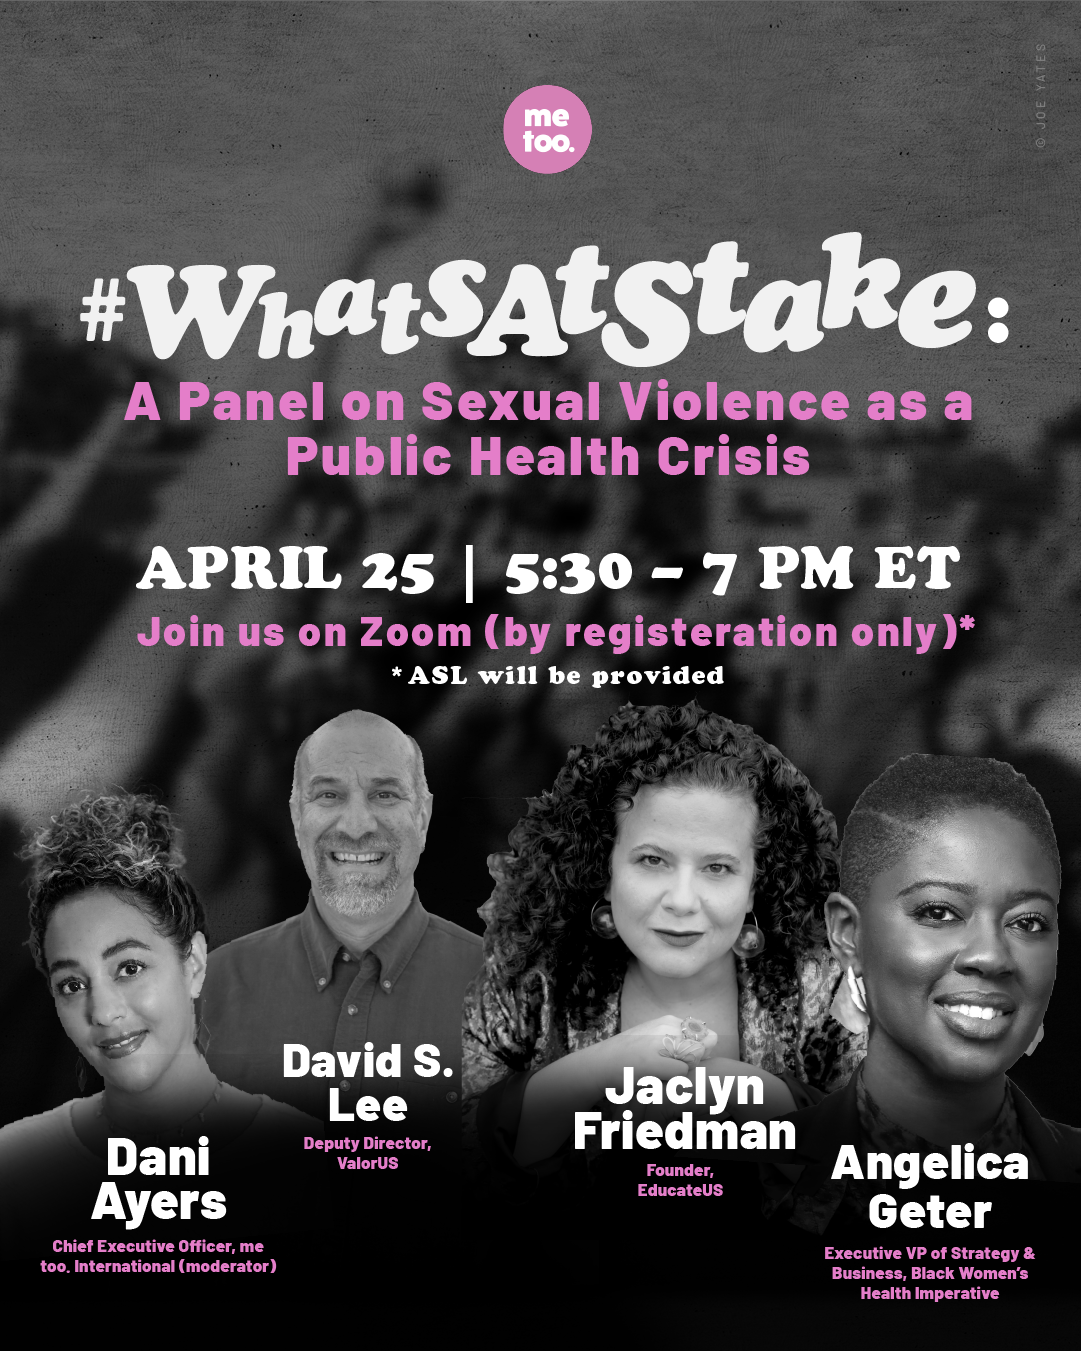 Black and white photo of Dani Ayers, CEO of me too, International, David S. Lee, Deputy Director at VALOR, Jaclyn Friedman, Founder of EducateUS, and Angelica Geter, Executive VP of Strategy & Business of Black Women’s Health Imperative. Text at the top of the image that says, “#What’s at stake. A panel discussion on sexual violence as a public health crisis.”